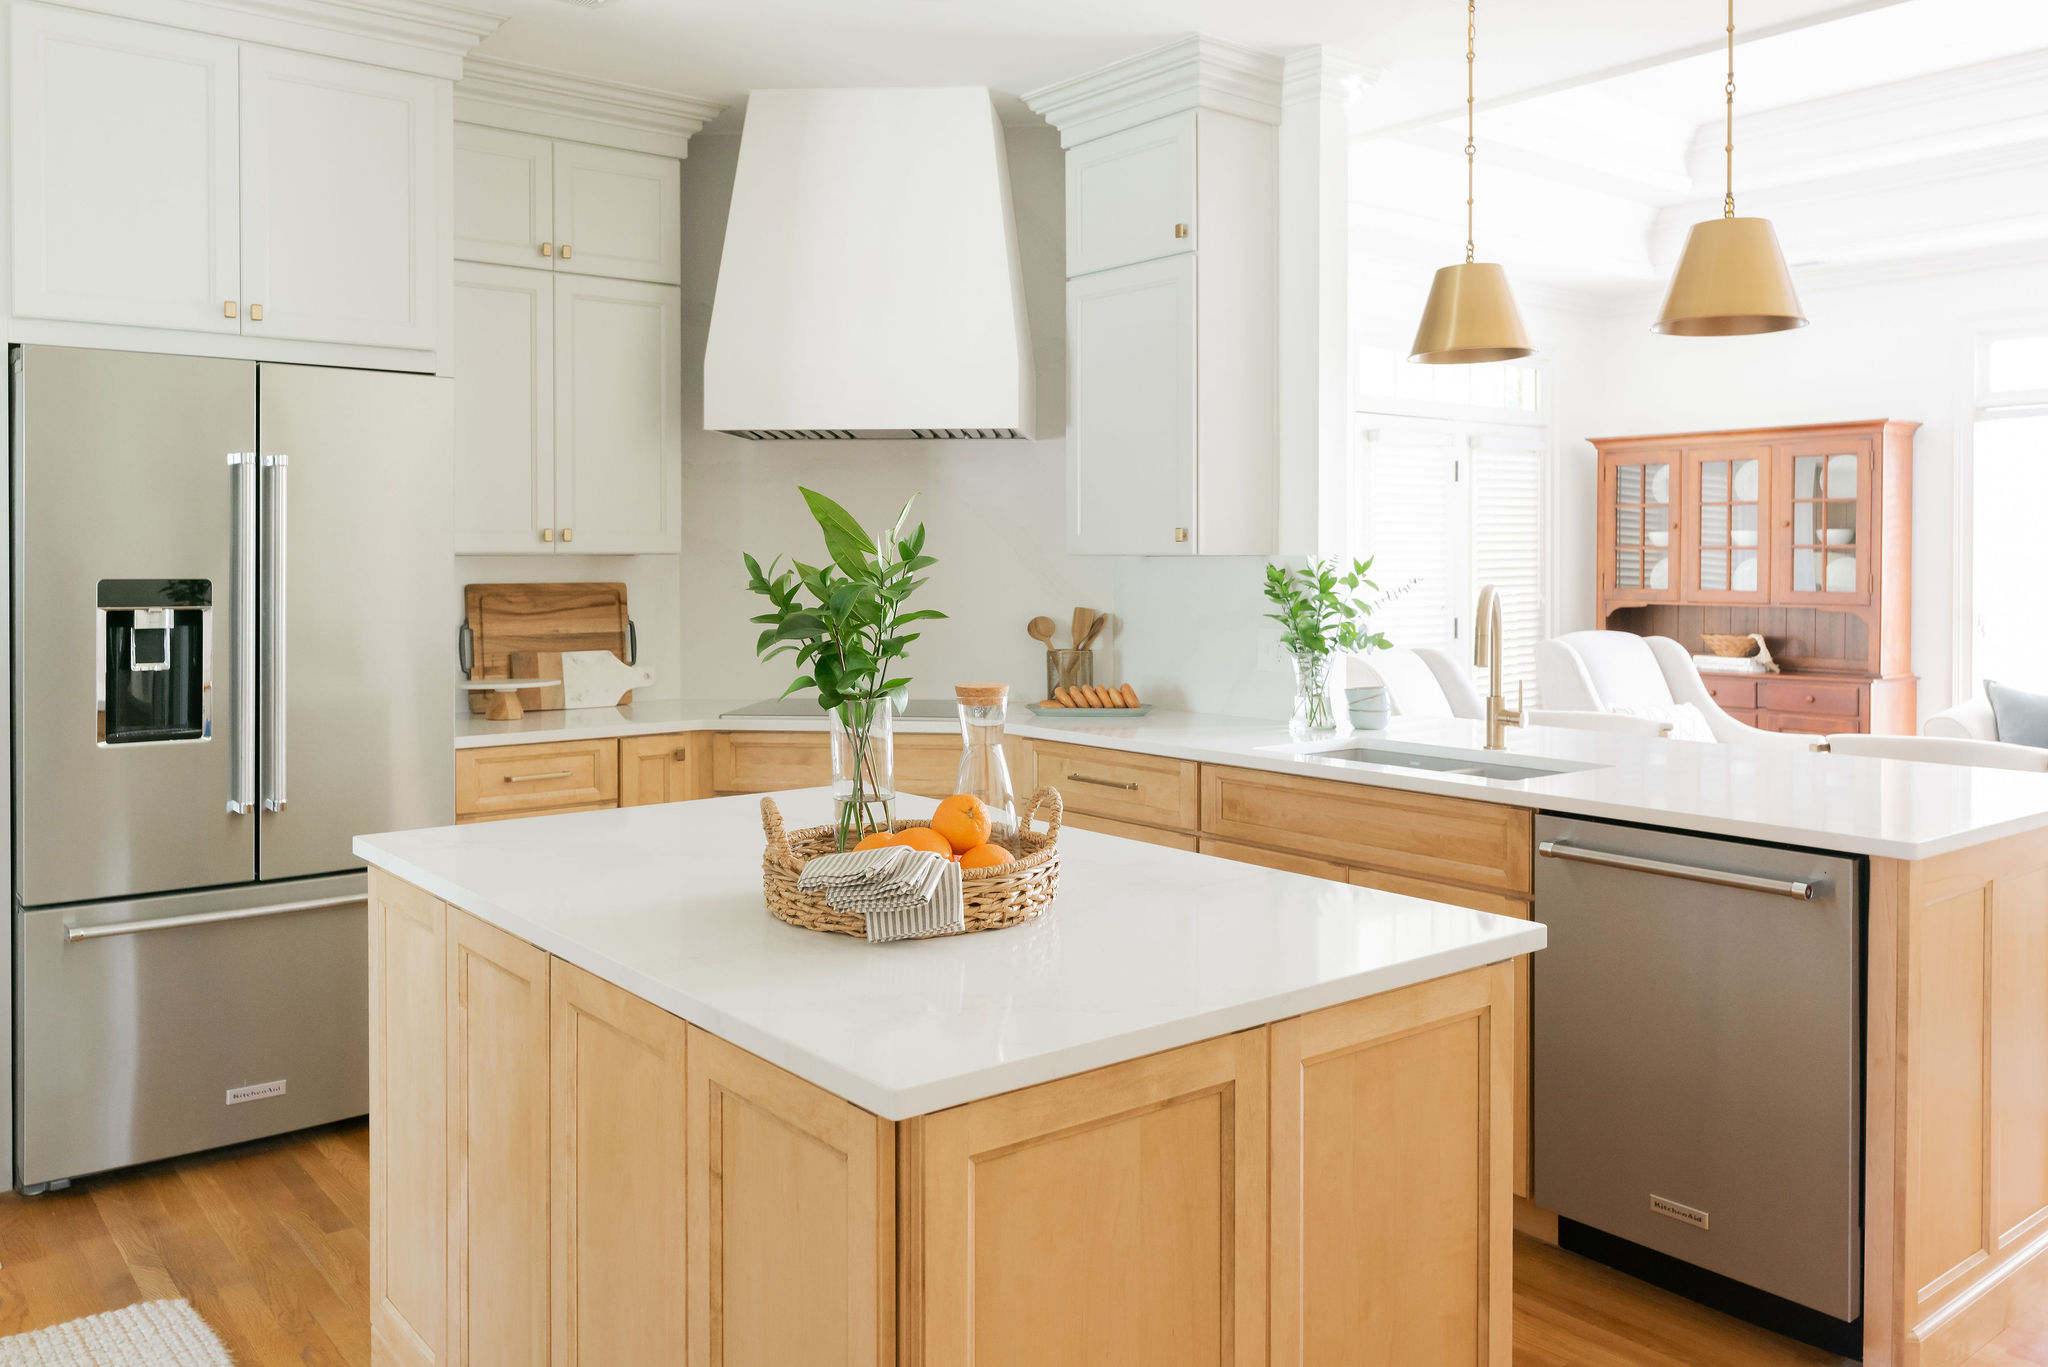 replacing your kitchen cabinets